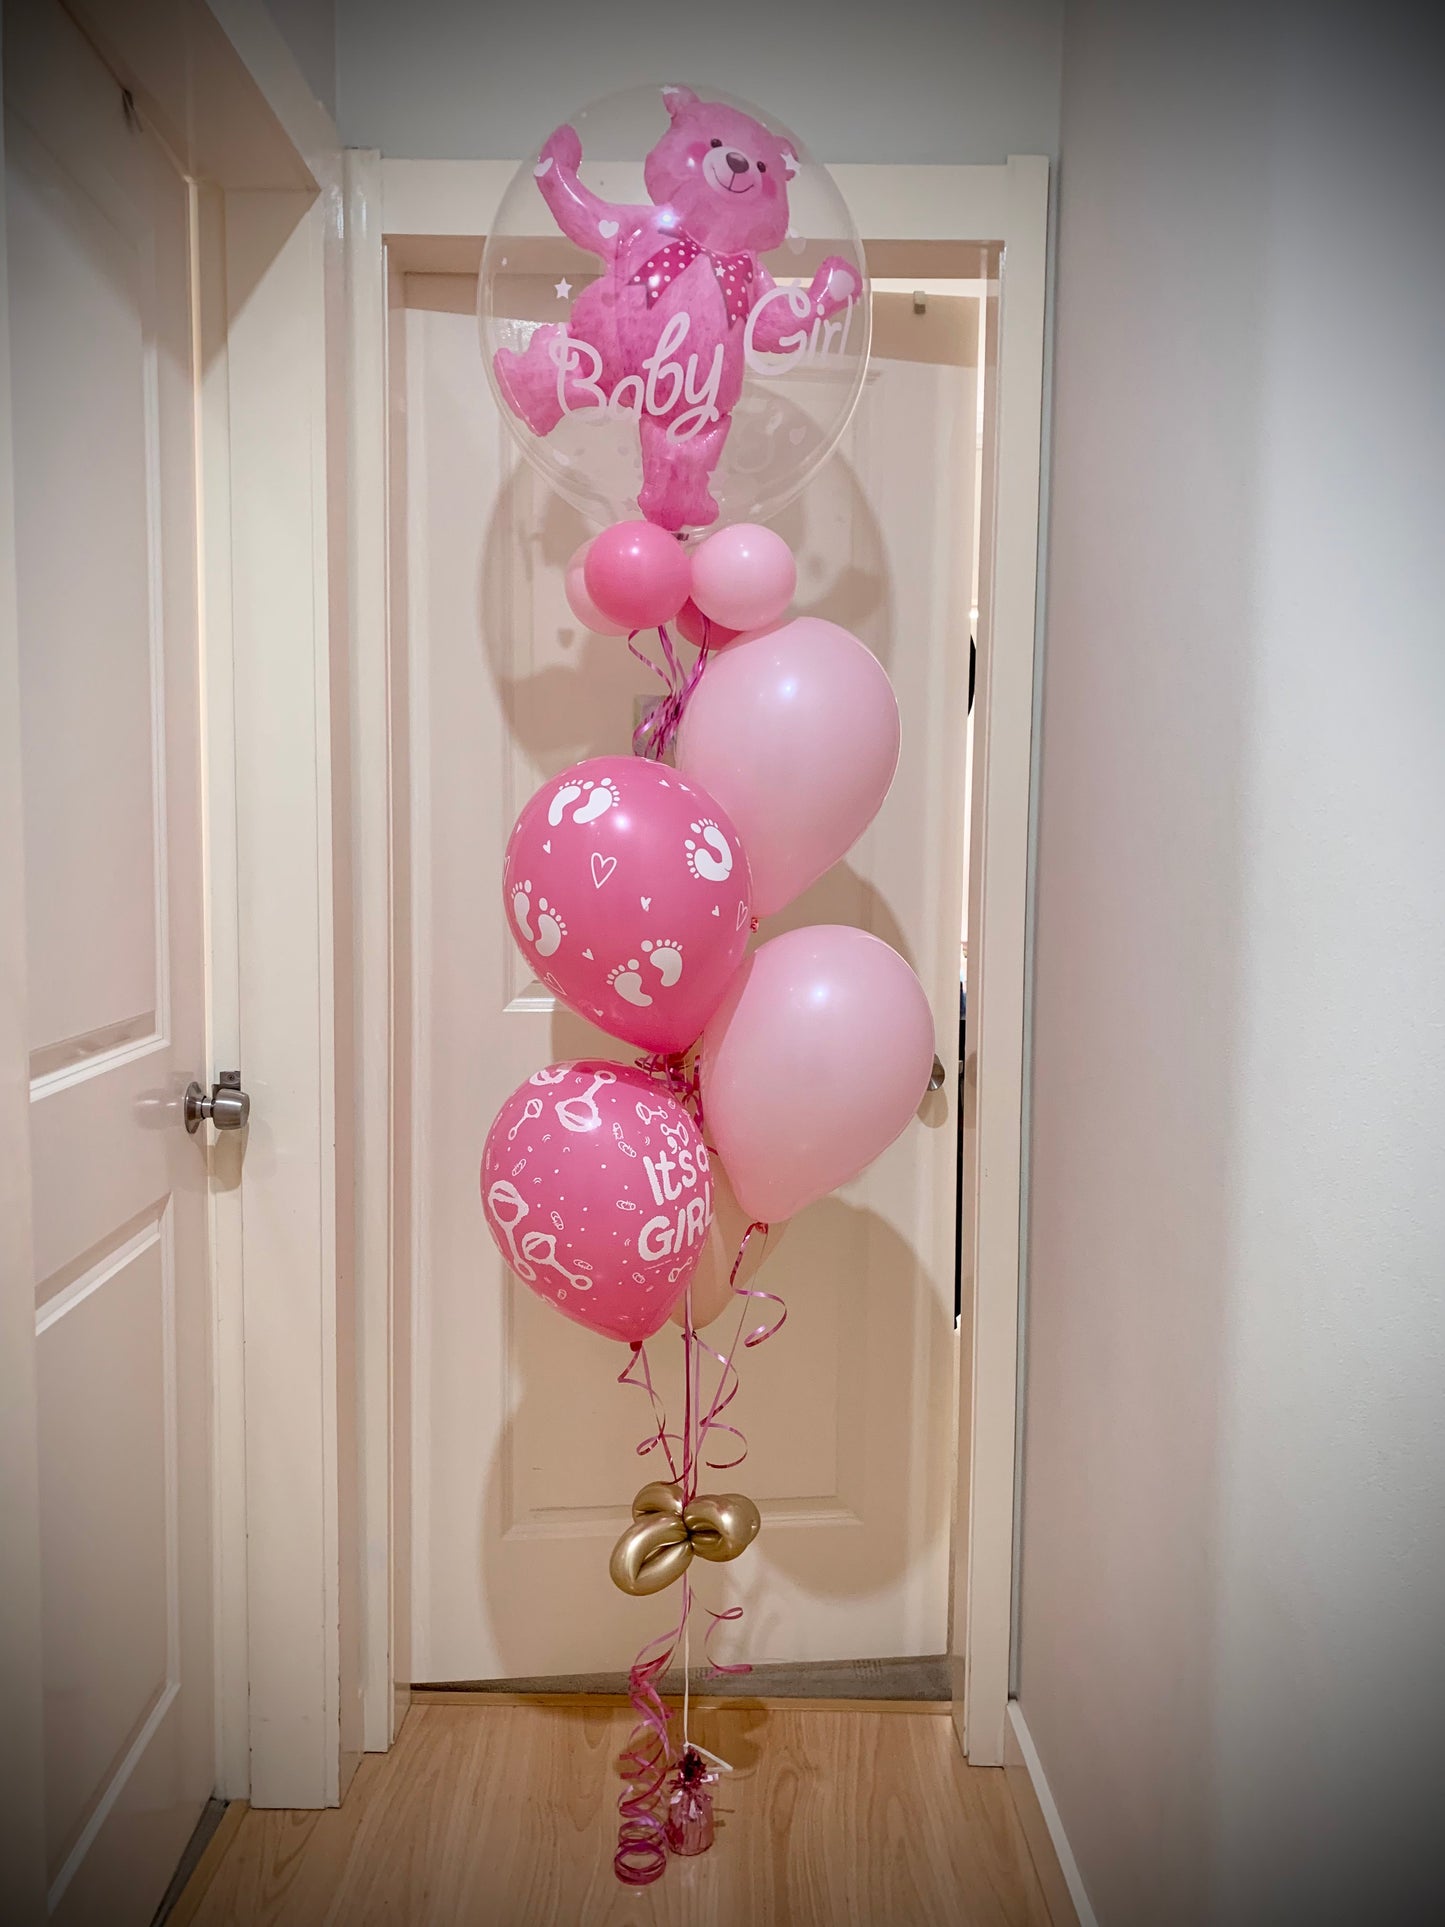 Baby Girl  Balloon Bouquets Set Up